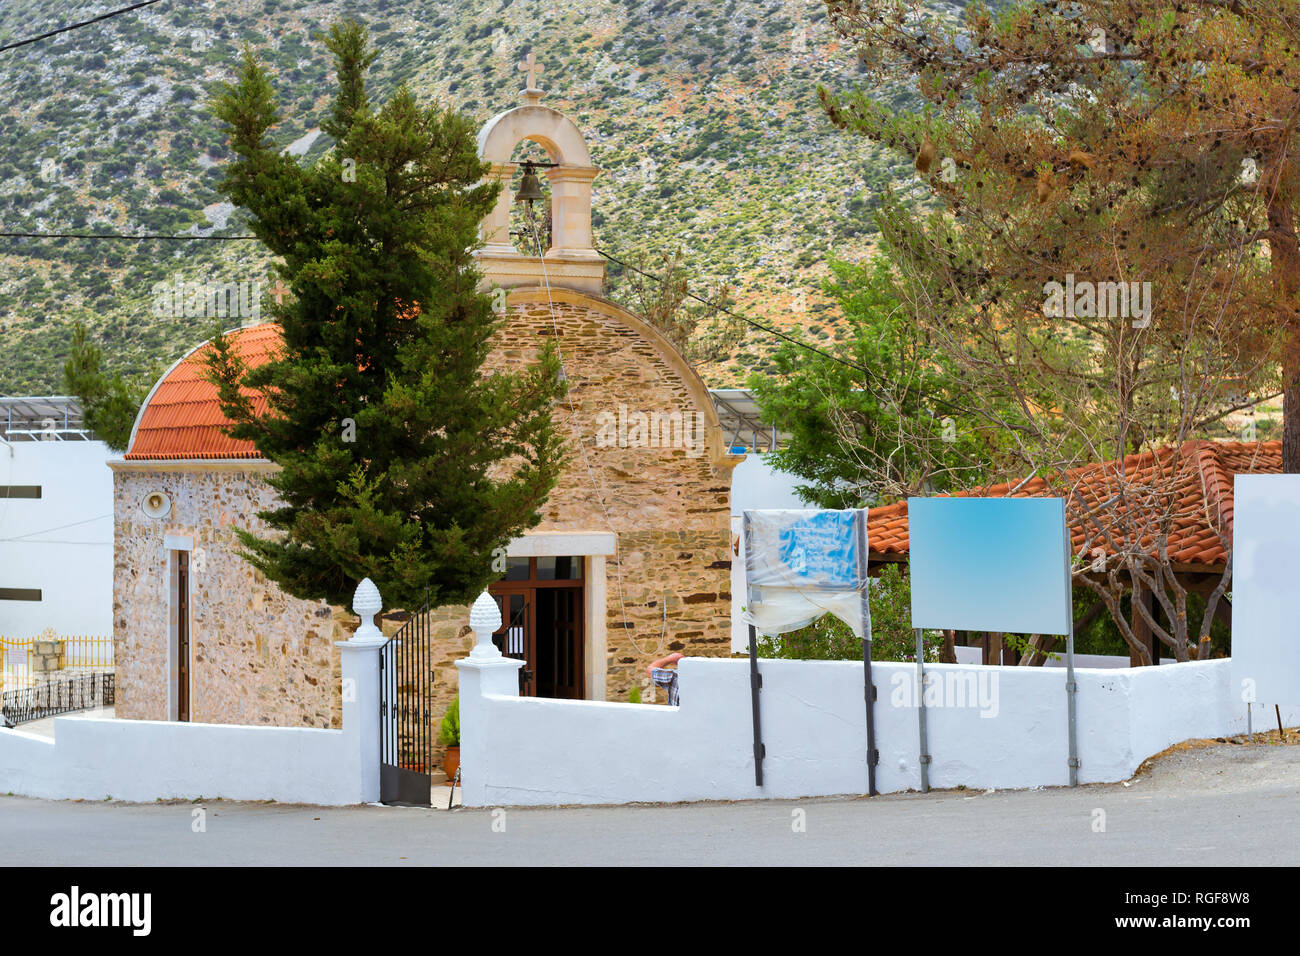 Eastern Orthodox Church, religious building made of stone with red tiled roof and bell in arch. Ekklisia Agia Triada. On background is mountains. Resort village Bali, Crete island Greece Stock Photo